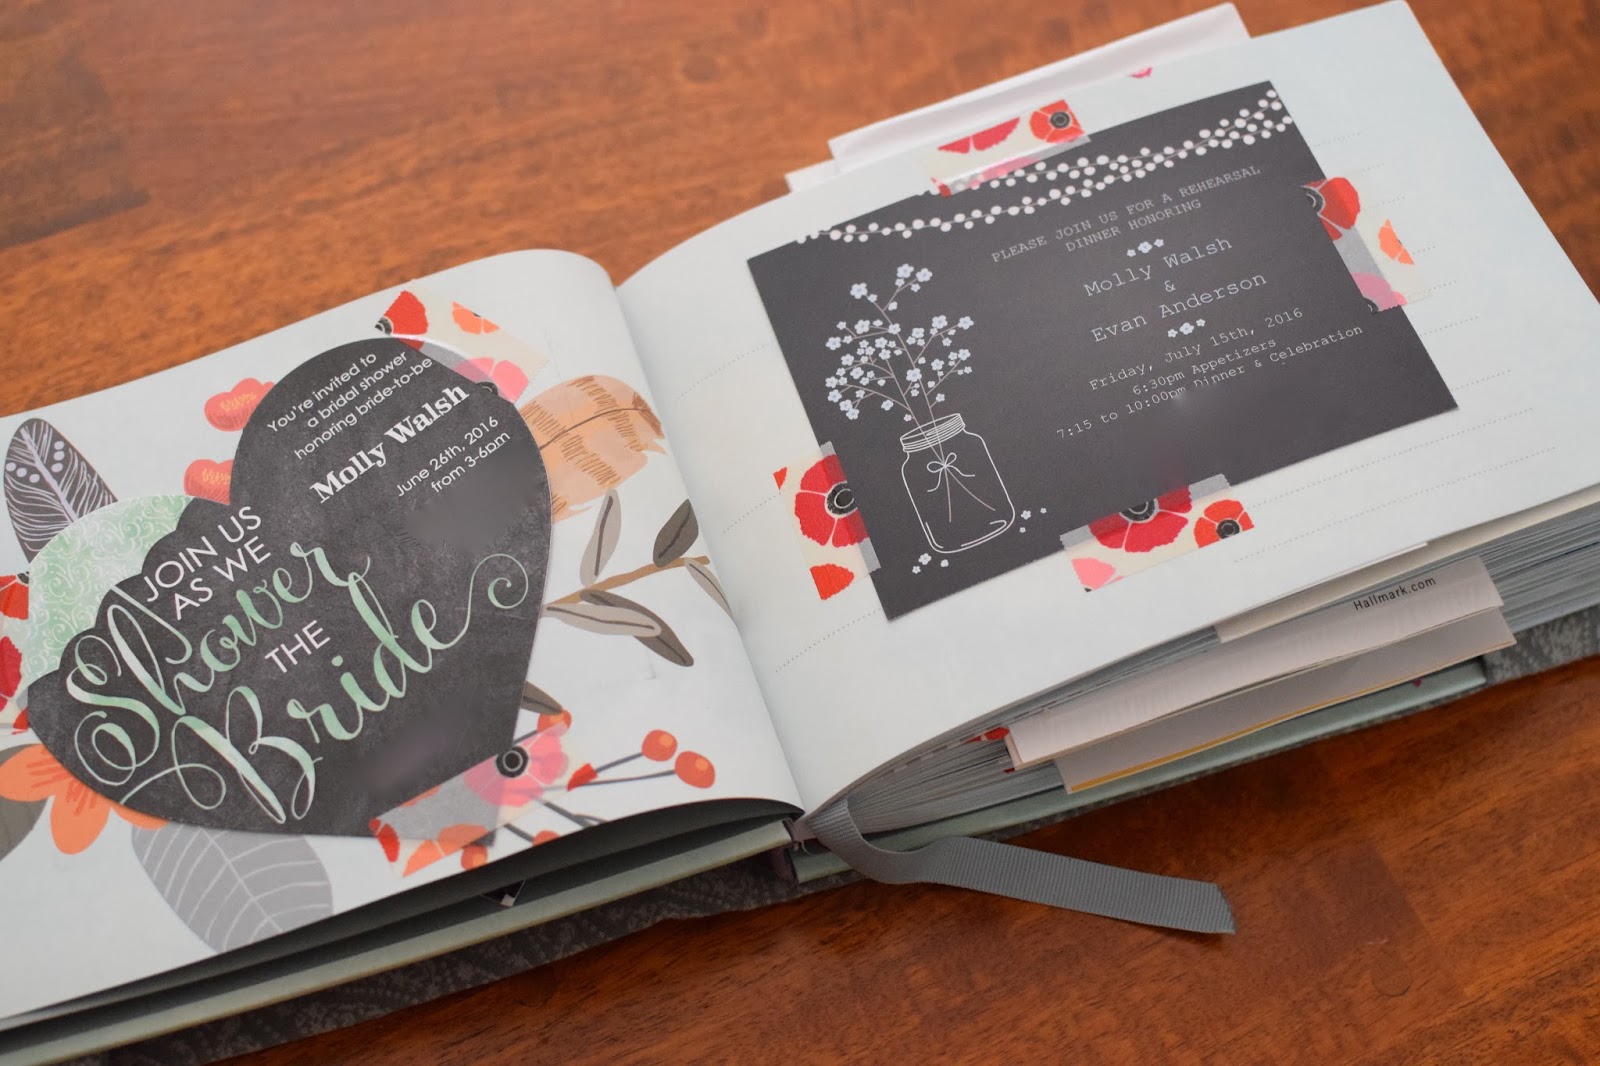  Letters To The Bride: Bridal Memory Book Scrapbook